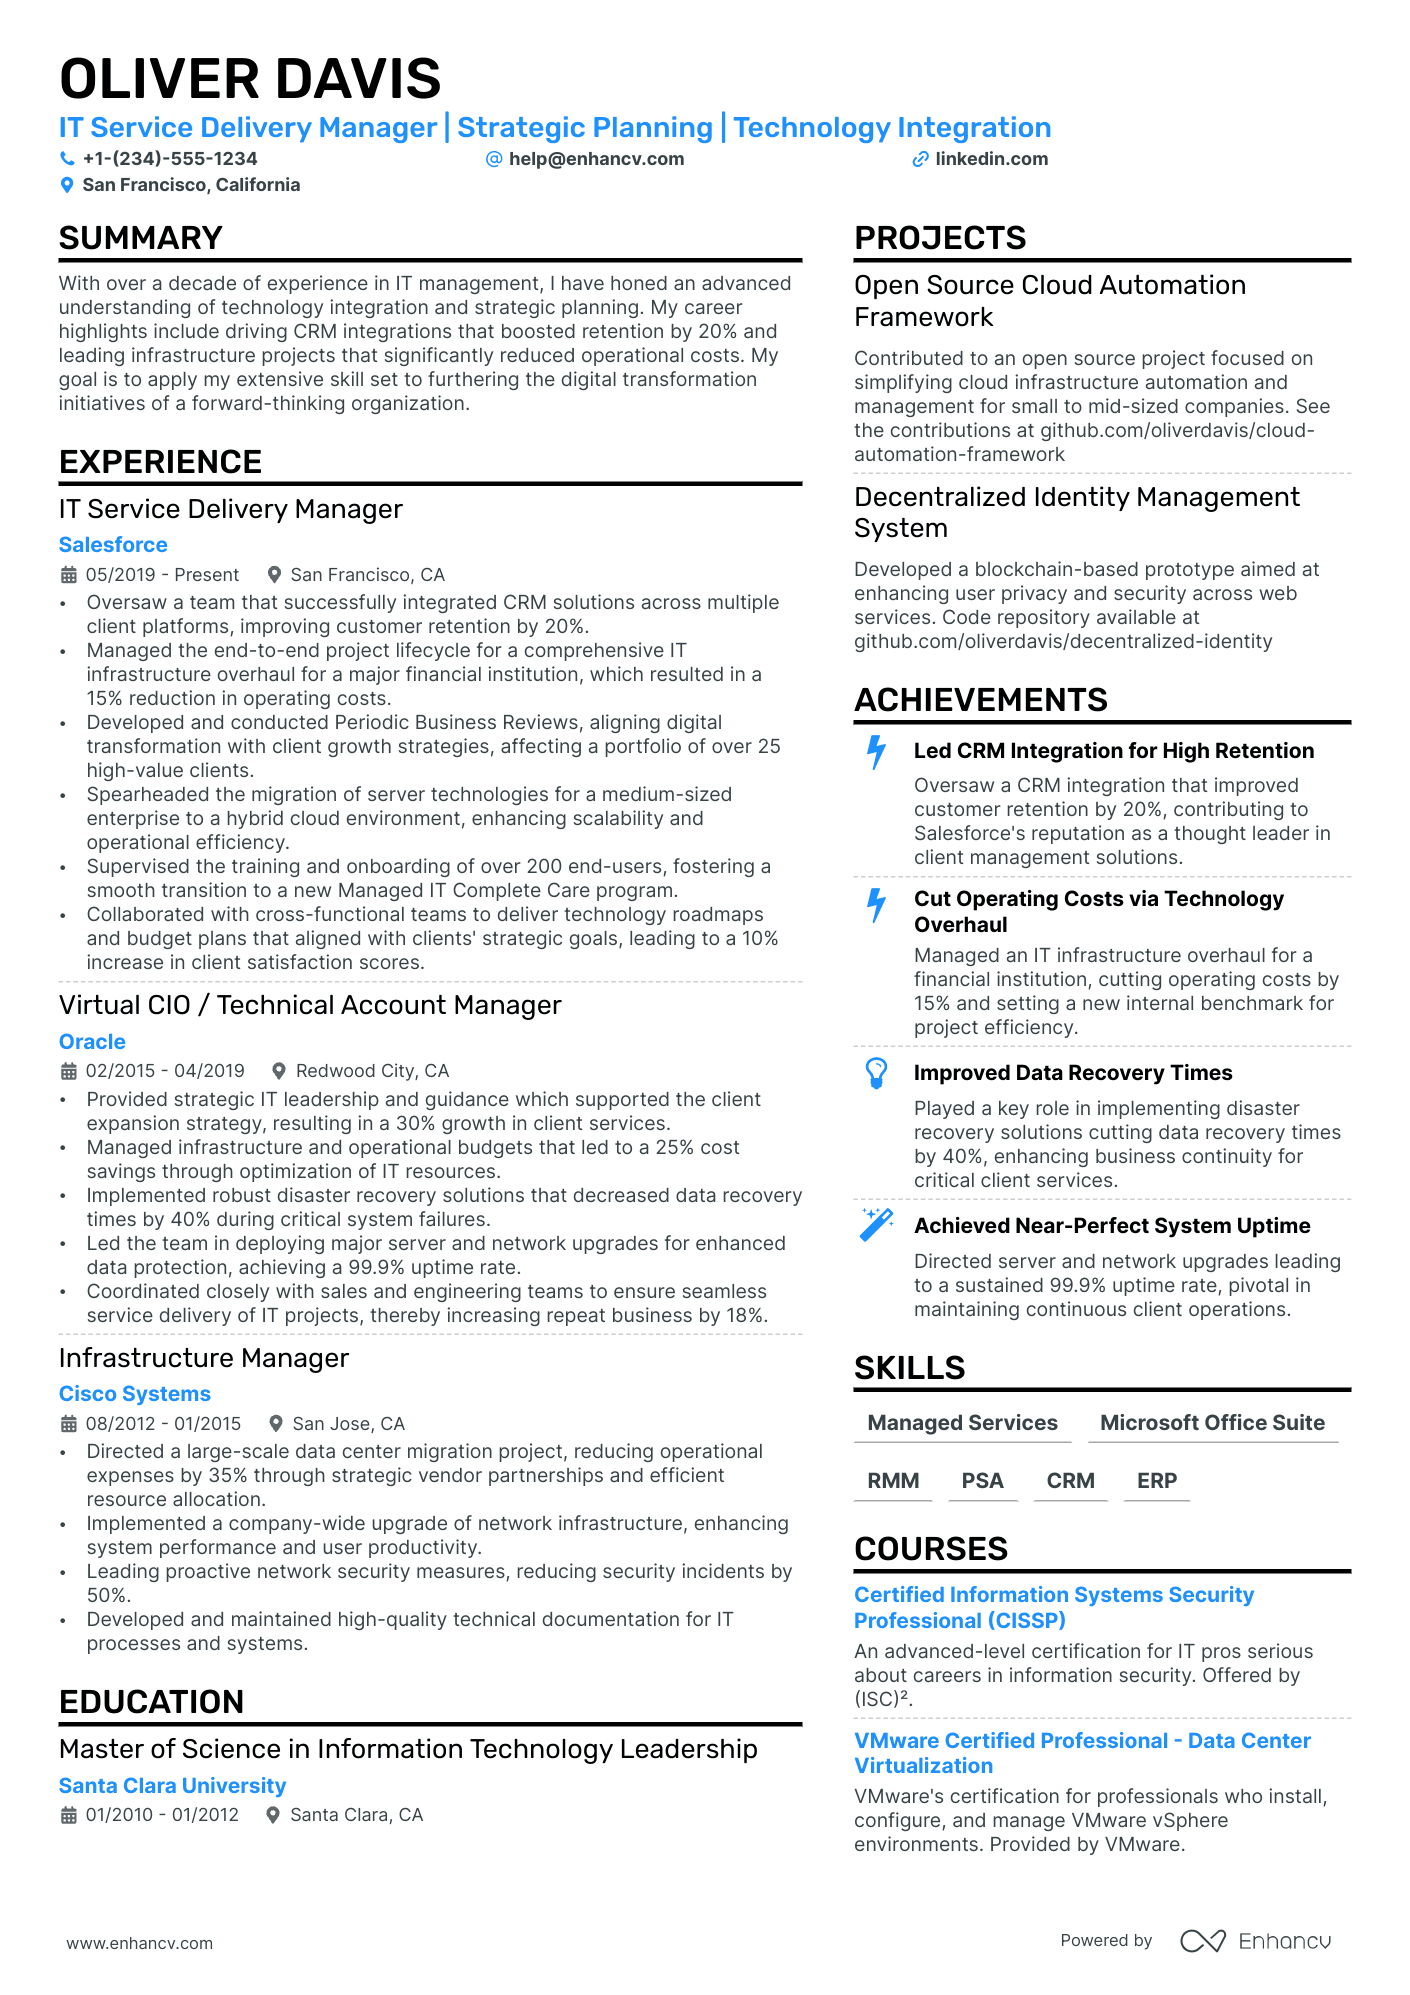 IT Service Delivery Manager resume example